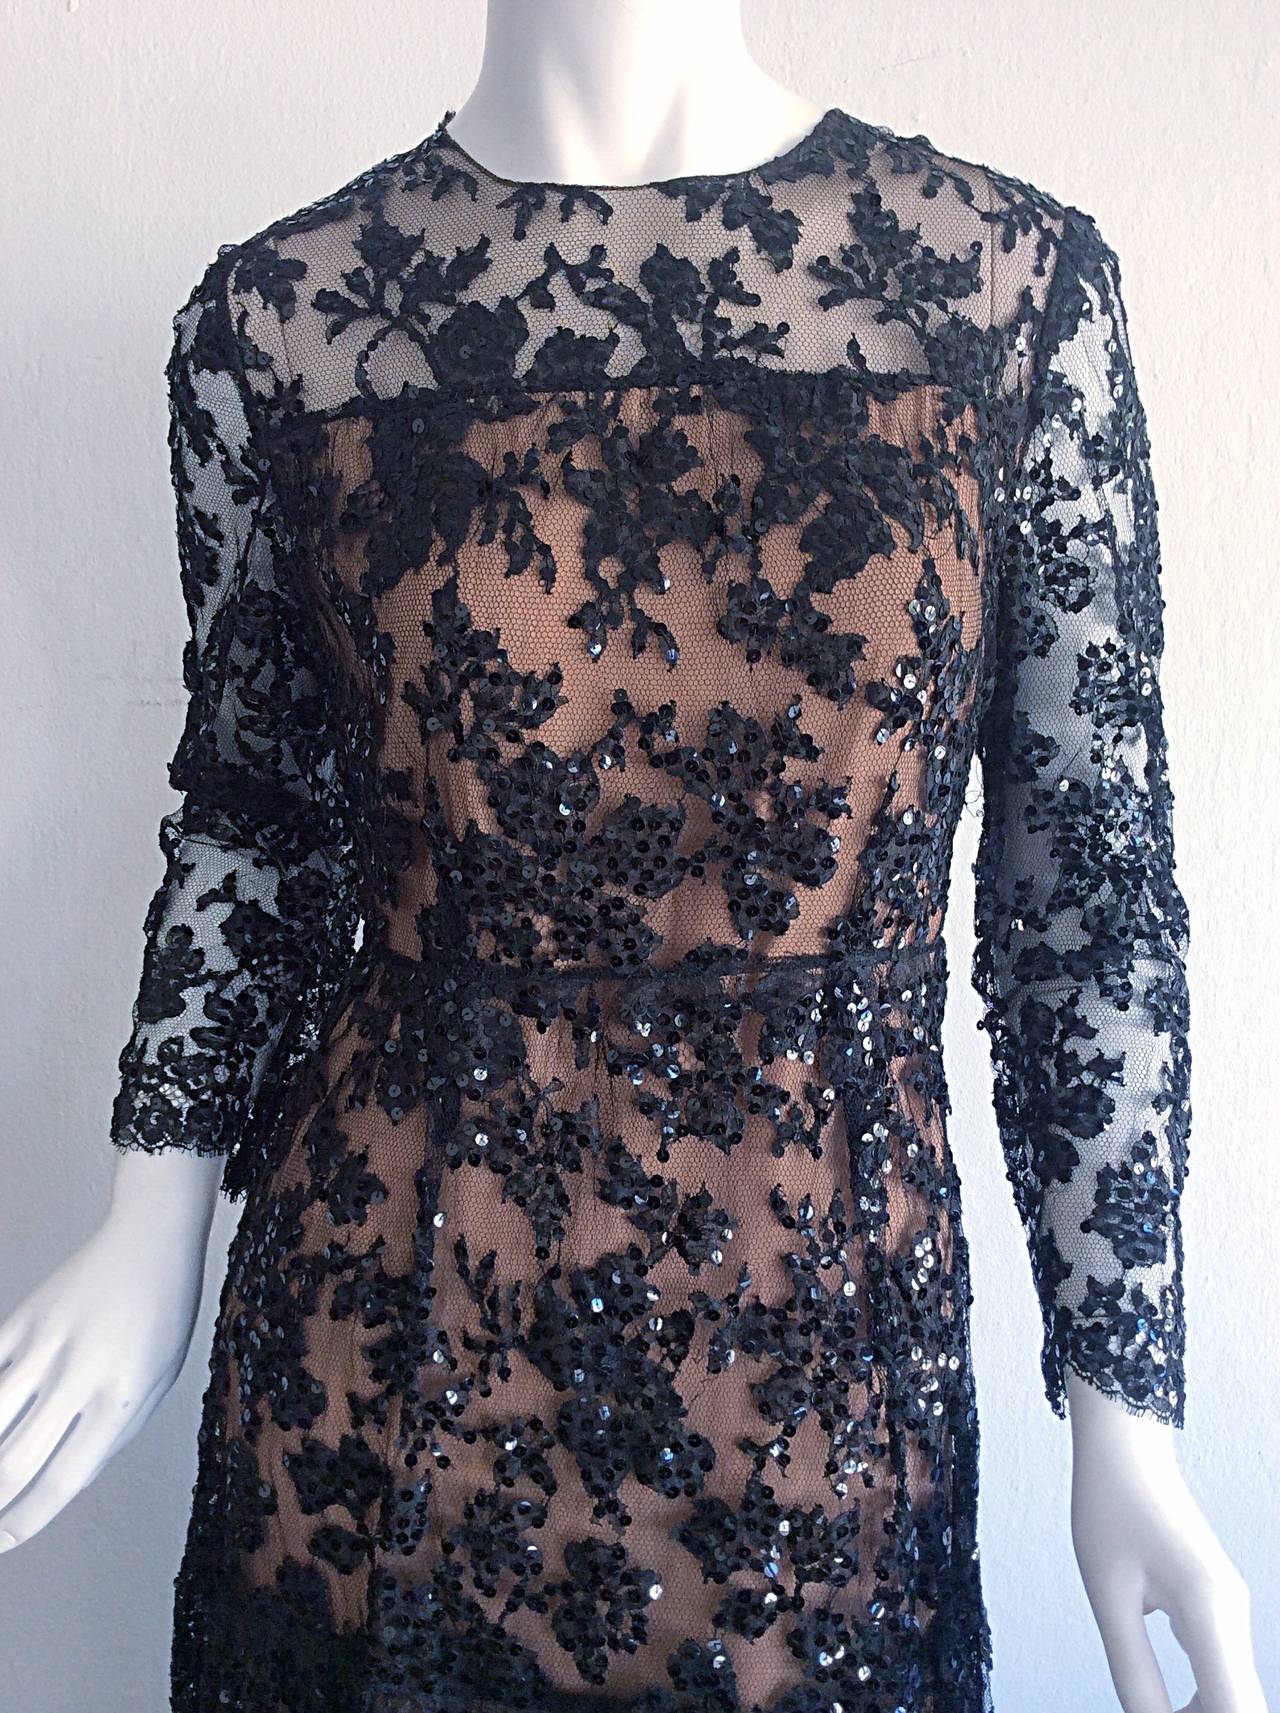 Such a stunning vintage 1960s Babydoll cocktail dress! Black French lace, covered with black sequins. Beautiful scalloped hems, with layers of nude silk under. Zips up the back, with hidden snaps up the back. Extremely well made. Such a pretty